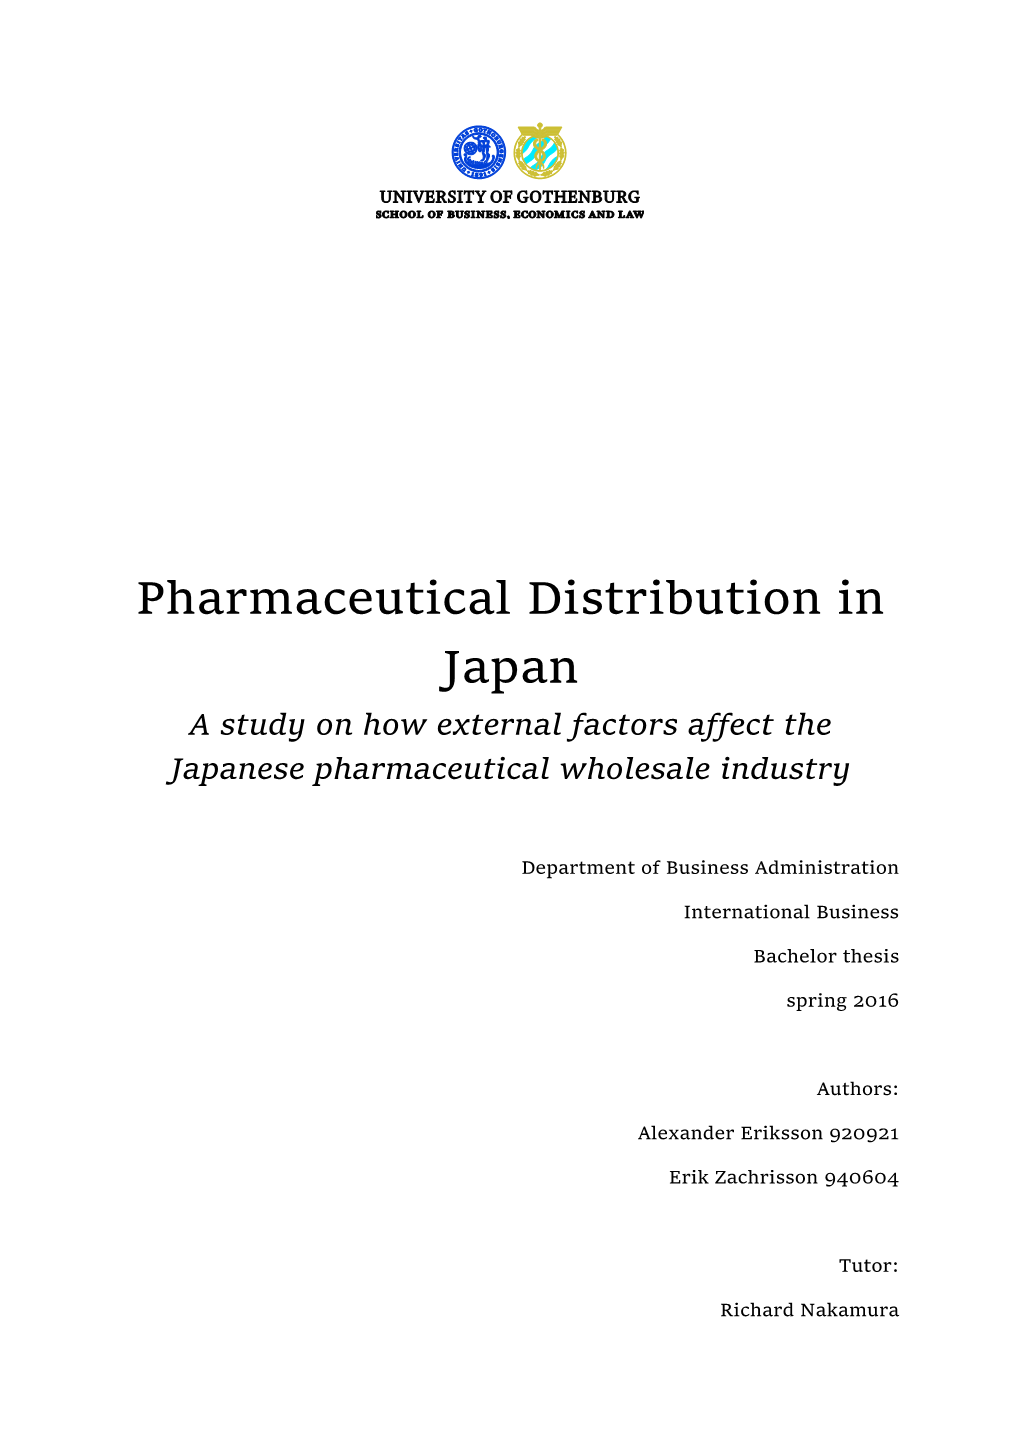 Pharmaceutical Distribution in Japan a Study on How External Factors Affect the Japanese Pharmaceutical Wholesale Industry